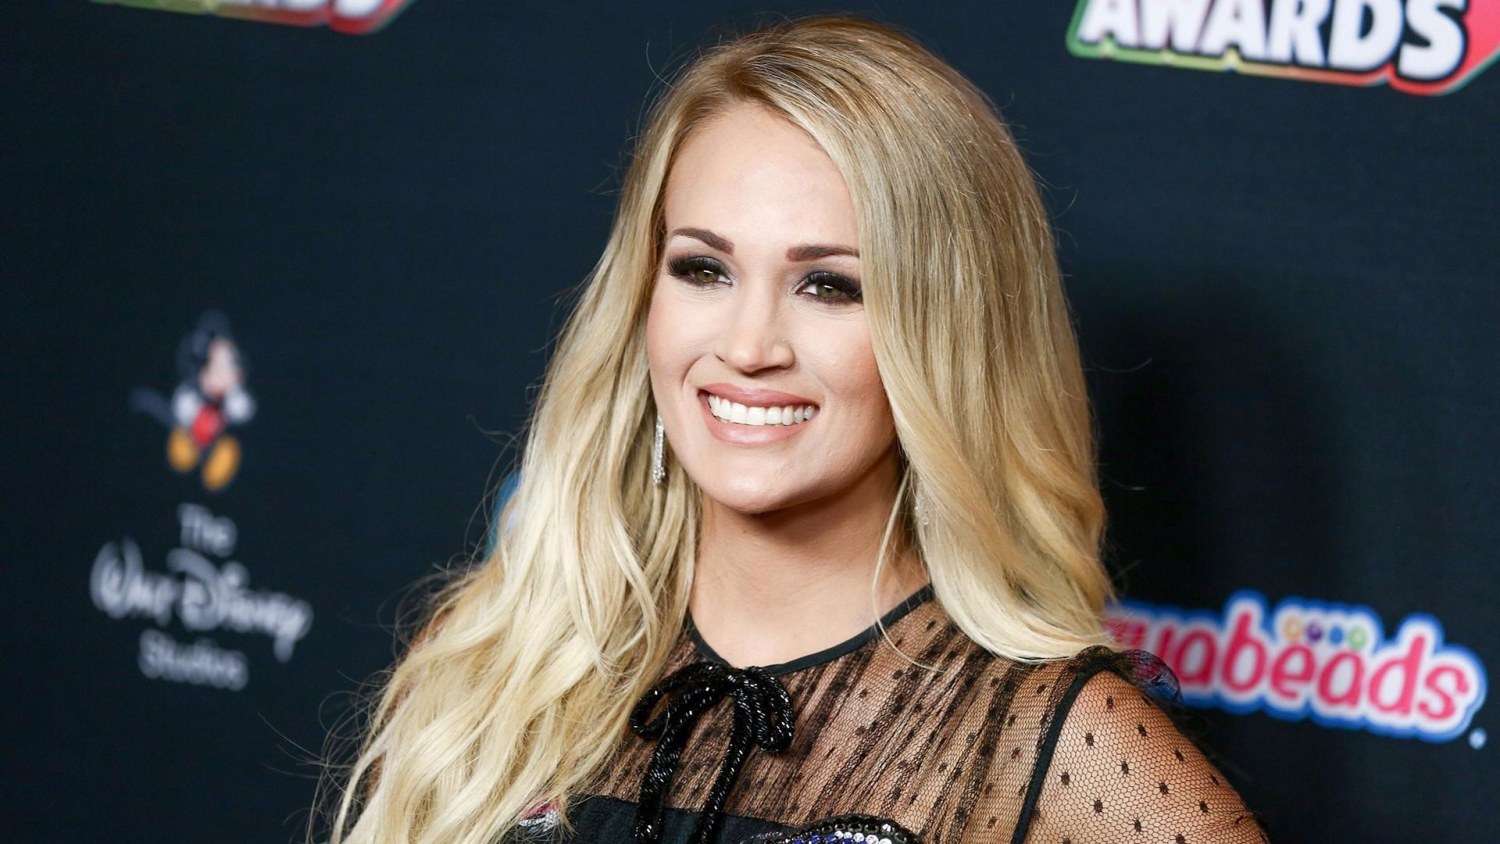 Carrie Underwood shares baby bump pic from American Music Awards rehearsal